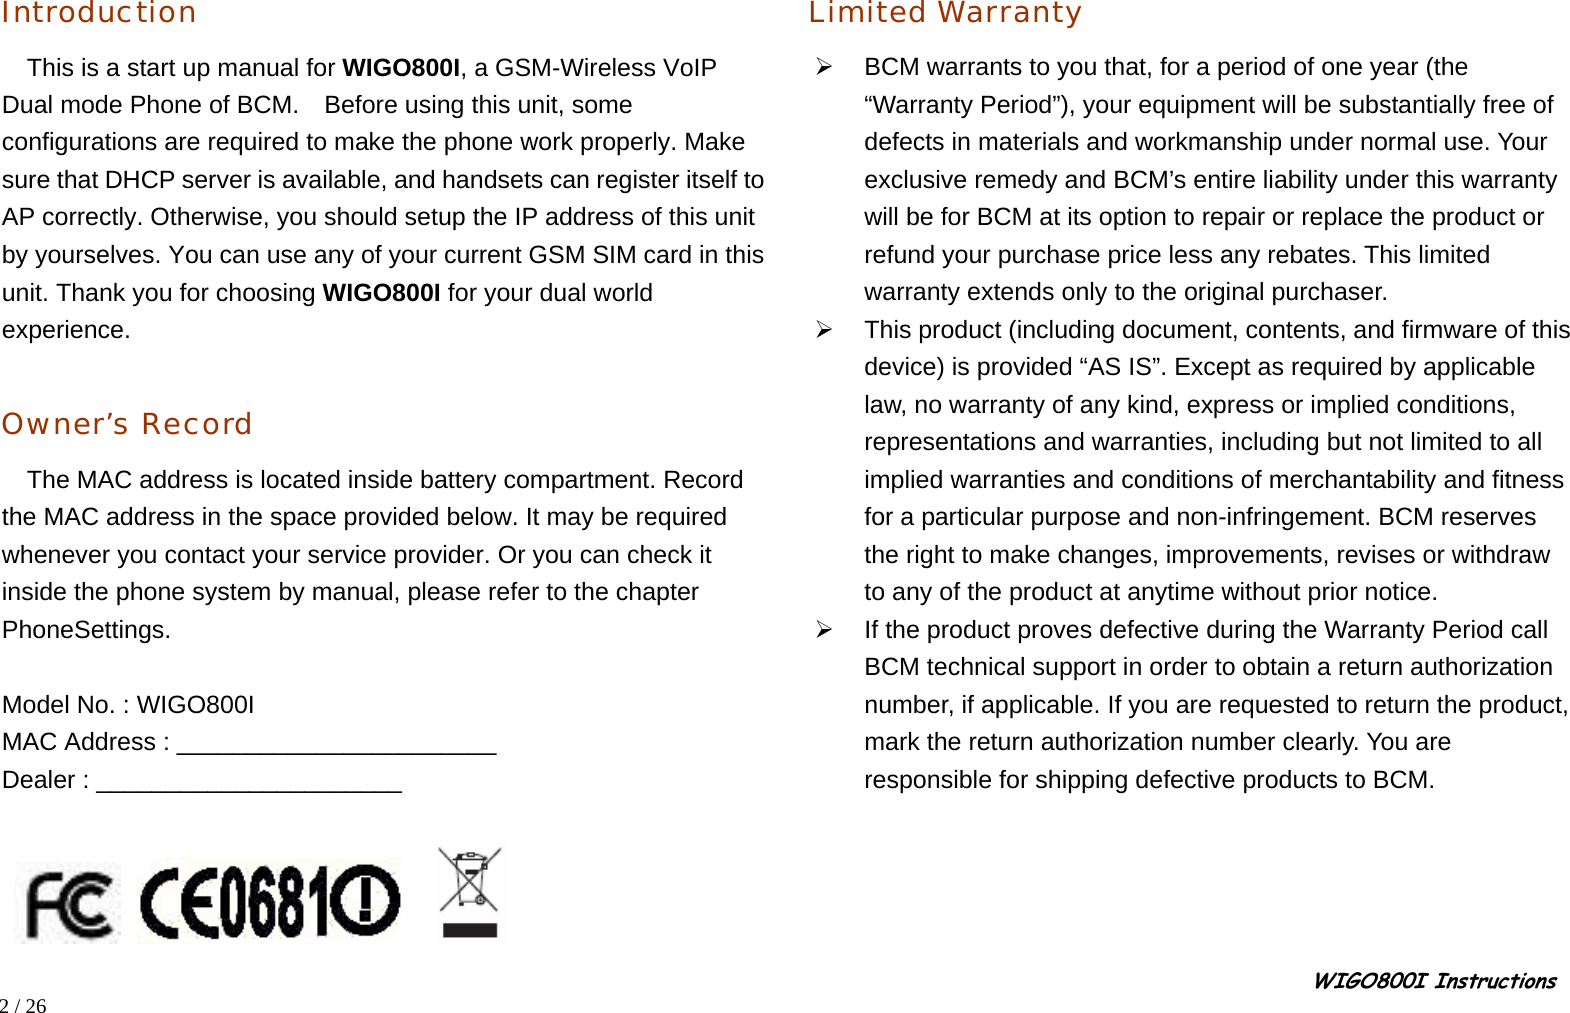                                                                                                                                                                                                                                                       WIGO800I Instructions            2 / 26   Introduction This is a start up manual for WIGO800I, a GSM-Wireless VoIP Dual mode Phone of BCM.    Before using this unit, some configurations are required to make the phone work properly. Make sure that DHCP server is available, and handsets can register itself to AP correctly. Otherwise, you should setup the IP address of this unit by yourselves. You can use any of your current GSM SIM card in this unit. Thank you for choosing WIGO800I for your dual world experience.  Owner’s Record The MAC address is located inside battery compartment. Record the MAC address in the space provided below. It may be required whenever you contact your service provider. Or you can check it inside the phone system by manual, please refer to the chapter PhoneSettings.  Model No. : WIGO800I MAC Address : _______________________ Dealer : ______________________          Limited Warranty ¾  BCM warrants to you that, for a period of one year (the “Warranty Period”), your equipment will be substantially free of defects in materials and workmanship under normal use. Your exclusive remedy and BCM’s entire liability under this warranty will be for BCM at its option to repair or replace the product or refund your purchase price less any rebates. This limited warranty extends only to the original purchaser. ¾  This product (including document, contents, and firmware of this device) is provided “AS IS”. Except as required by applicable law, no warranty of any kind, express or implied conditions, representations and warranties, including but not limited to all implied warranties and conditions of merchantability and fitness for a particular purpose and non-infringement. BCM reserves the right to make changes, improvements, revises or withdraw to any of the product at anytime without prior notice. ¾  If the product proves defective during the Warranty Period call BCM technical support in order to obtain a return authorization number, if applicable. If you are requested to return the product, mark the return authorization number clearly. You are responsible for shipping defective products to BCM. 